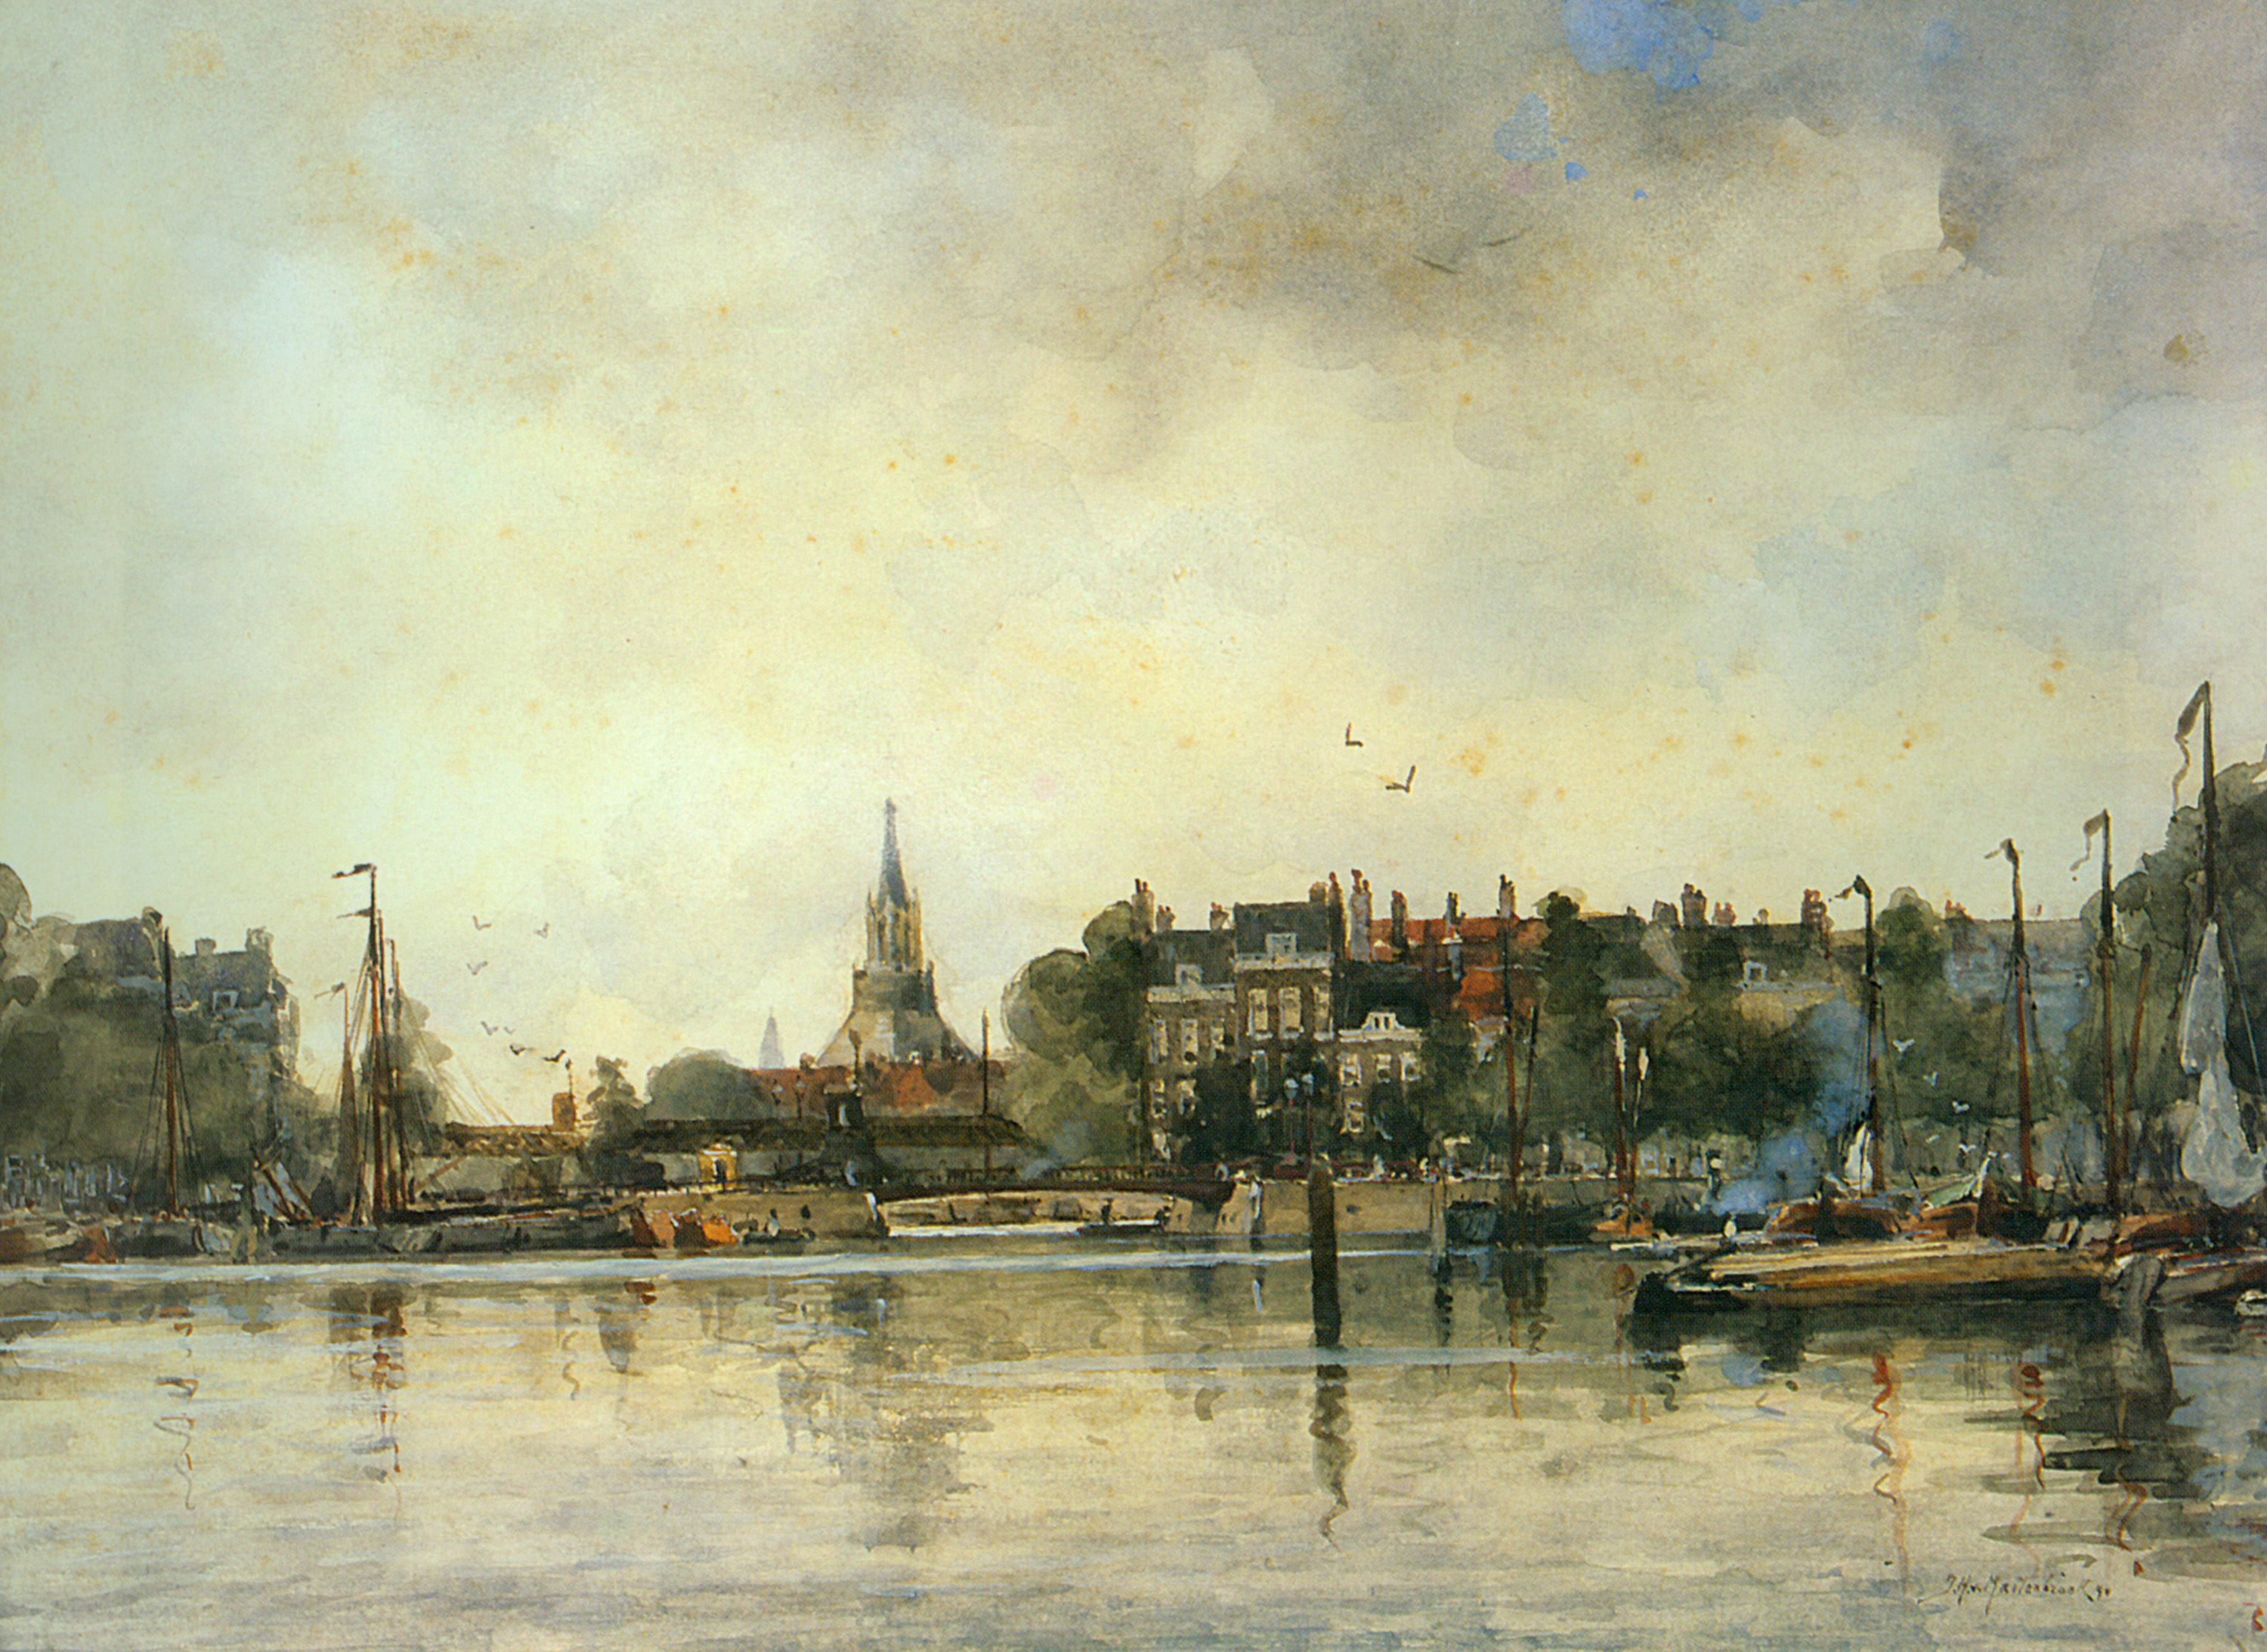 A Townview with Moored Vessels along a Quay by Johan Hendrik Van Mastenbroek